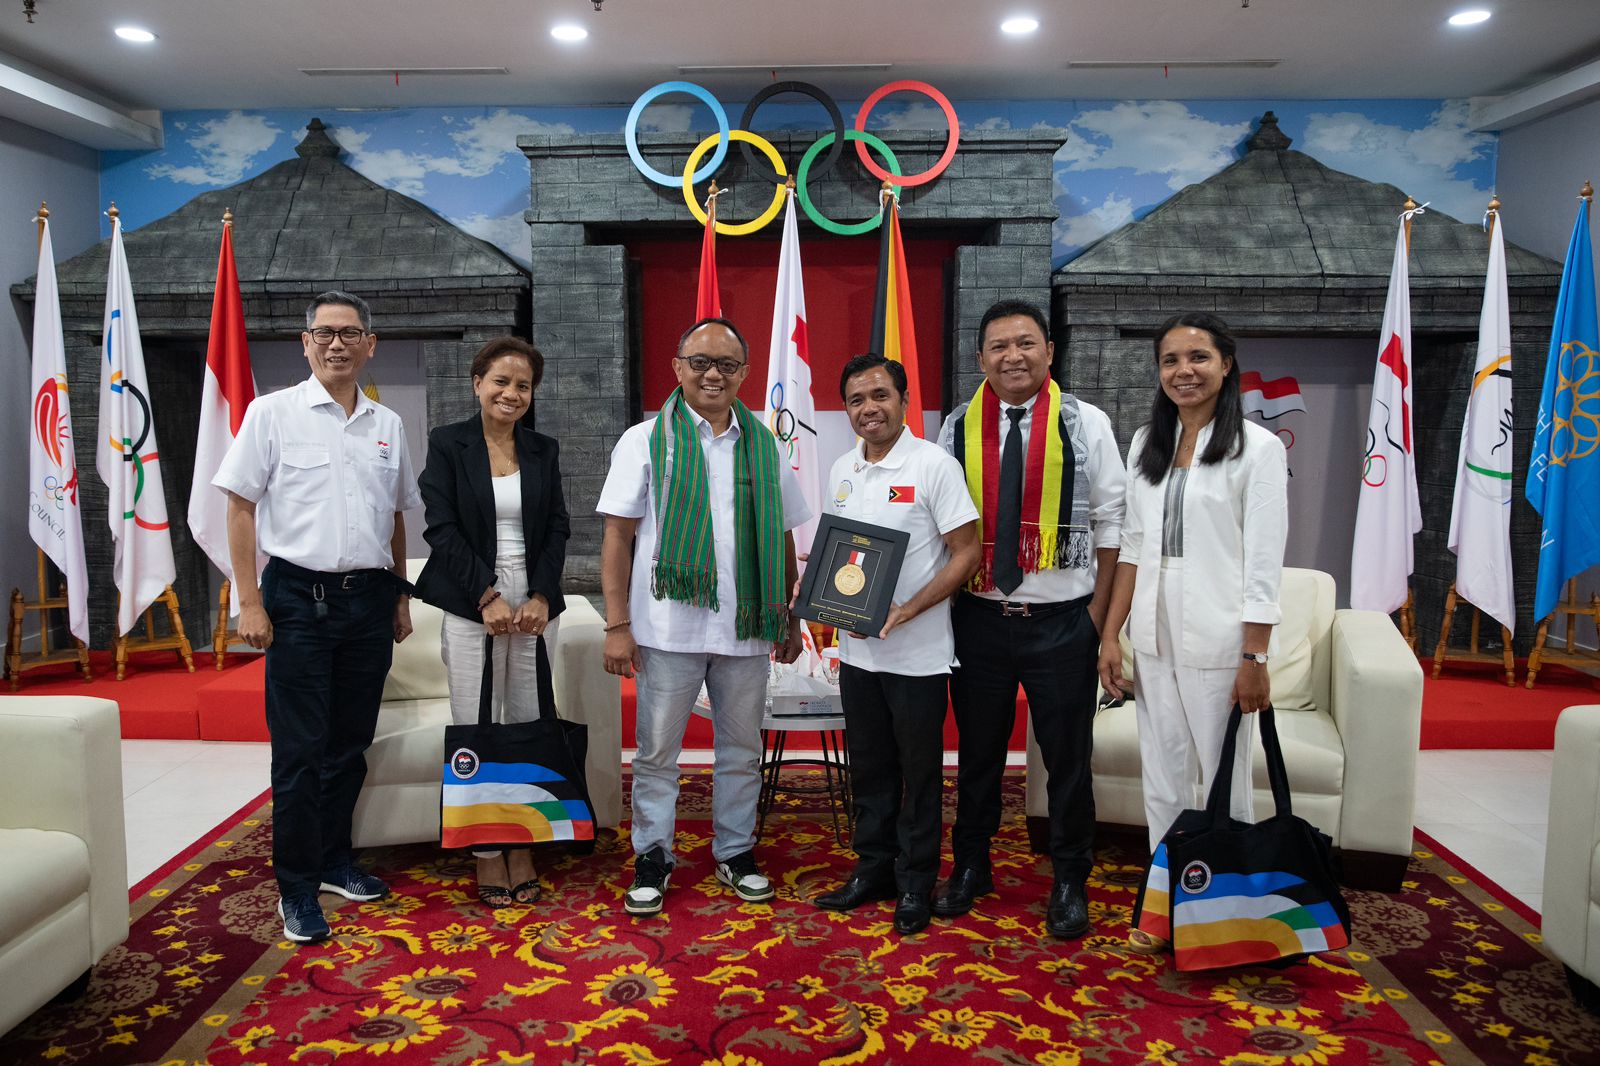 NOC Indonesia Welcomes NOC Timor Leste - Indonesia Olympic Commitee